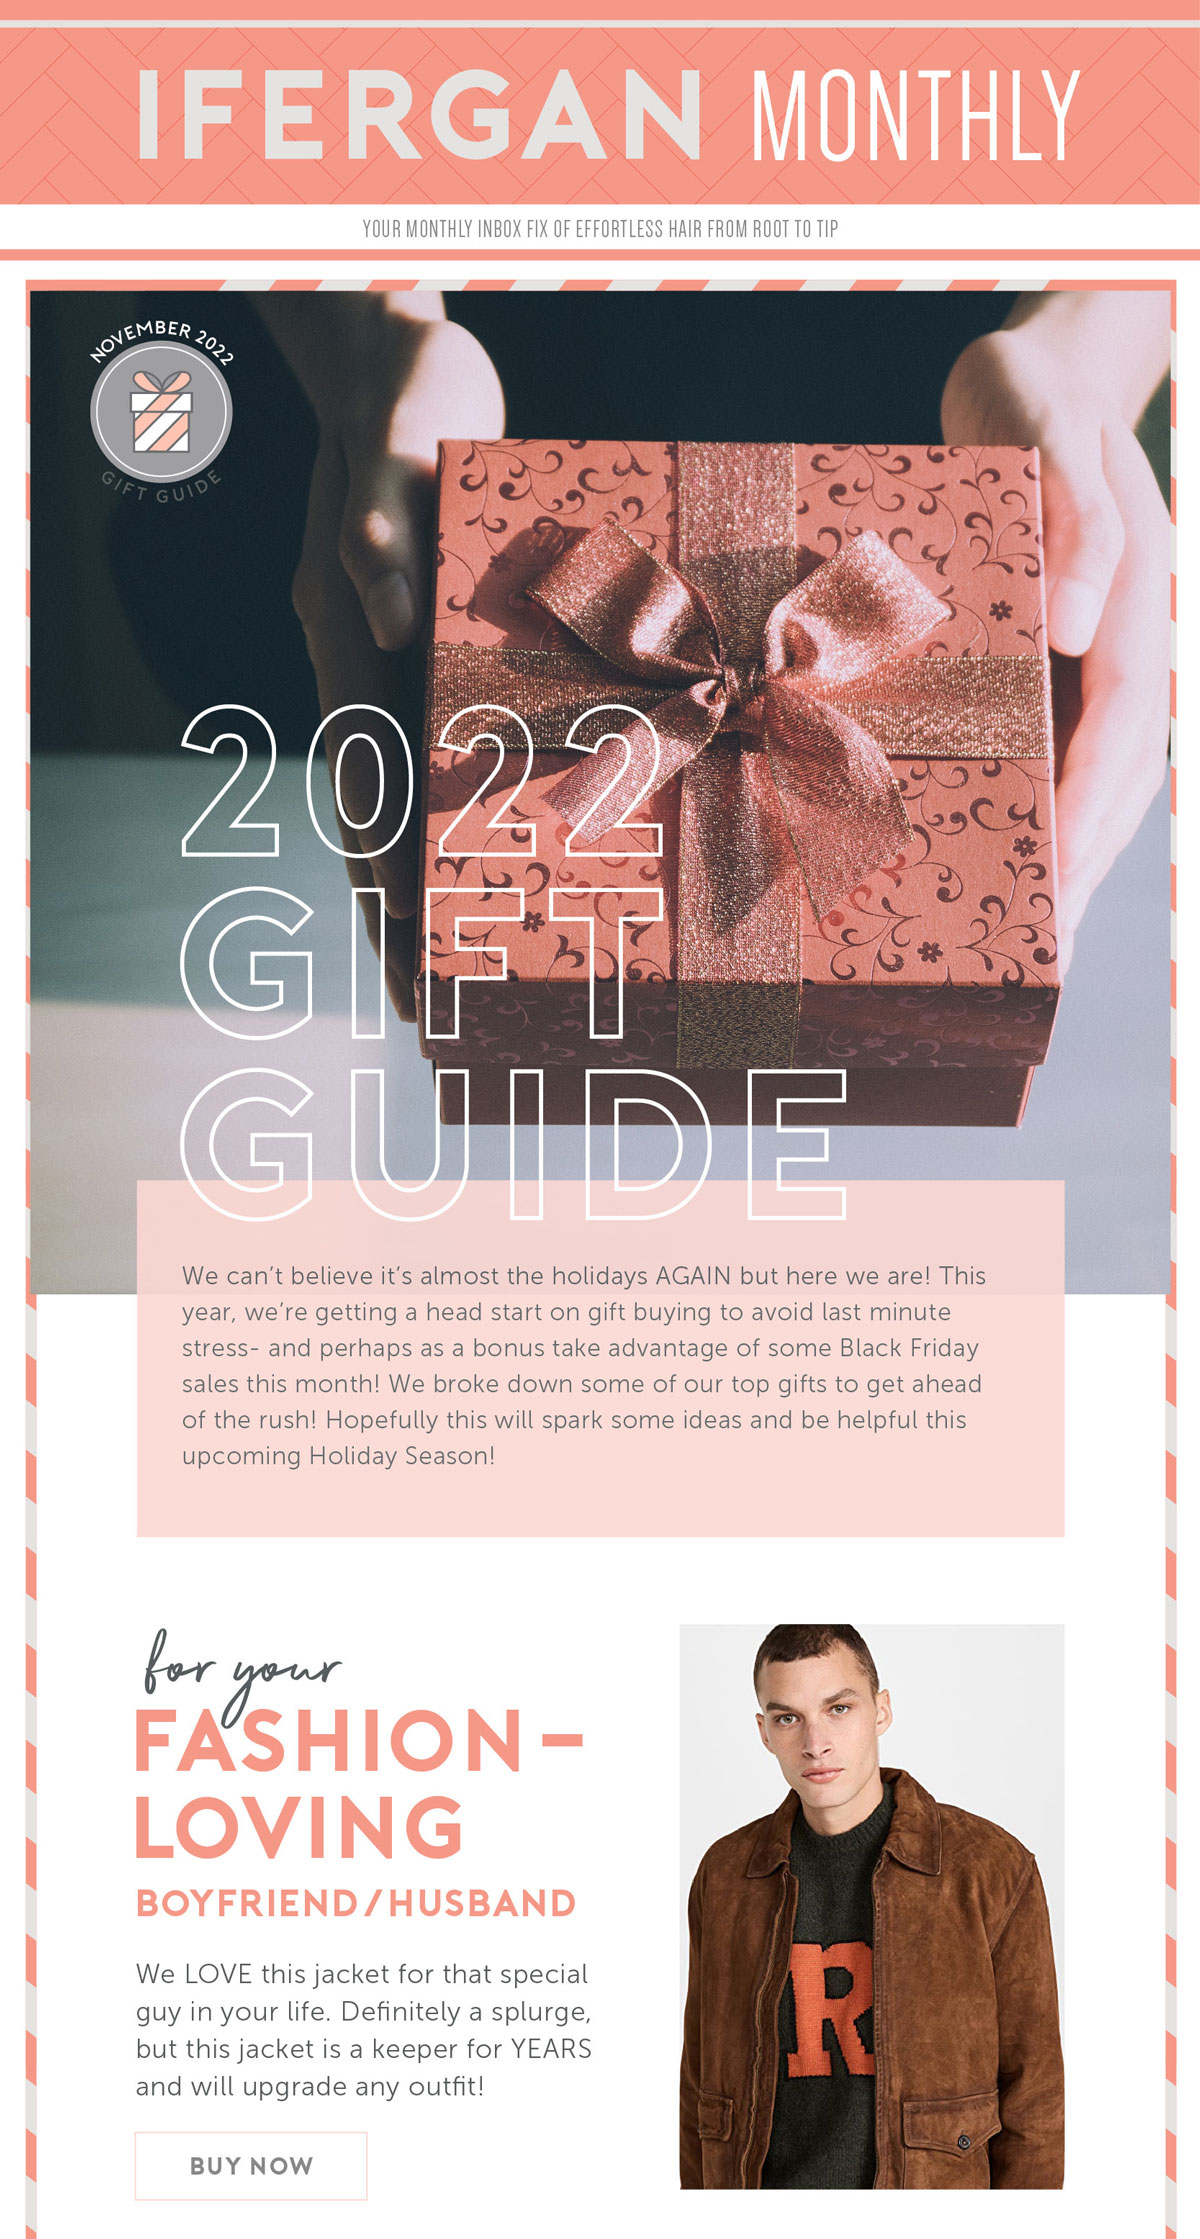 Ifergan Monthly: 2022 Gift Guide. We can’t believe it’s almost the holidays AGAIN but here we are! This year, we’re getting a head start on gift buying to avoid last minute stress.